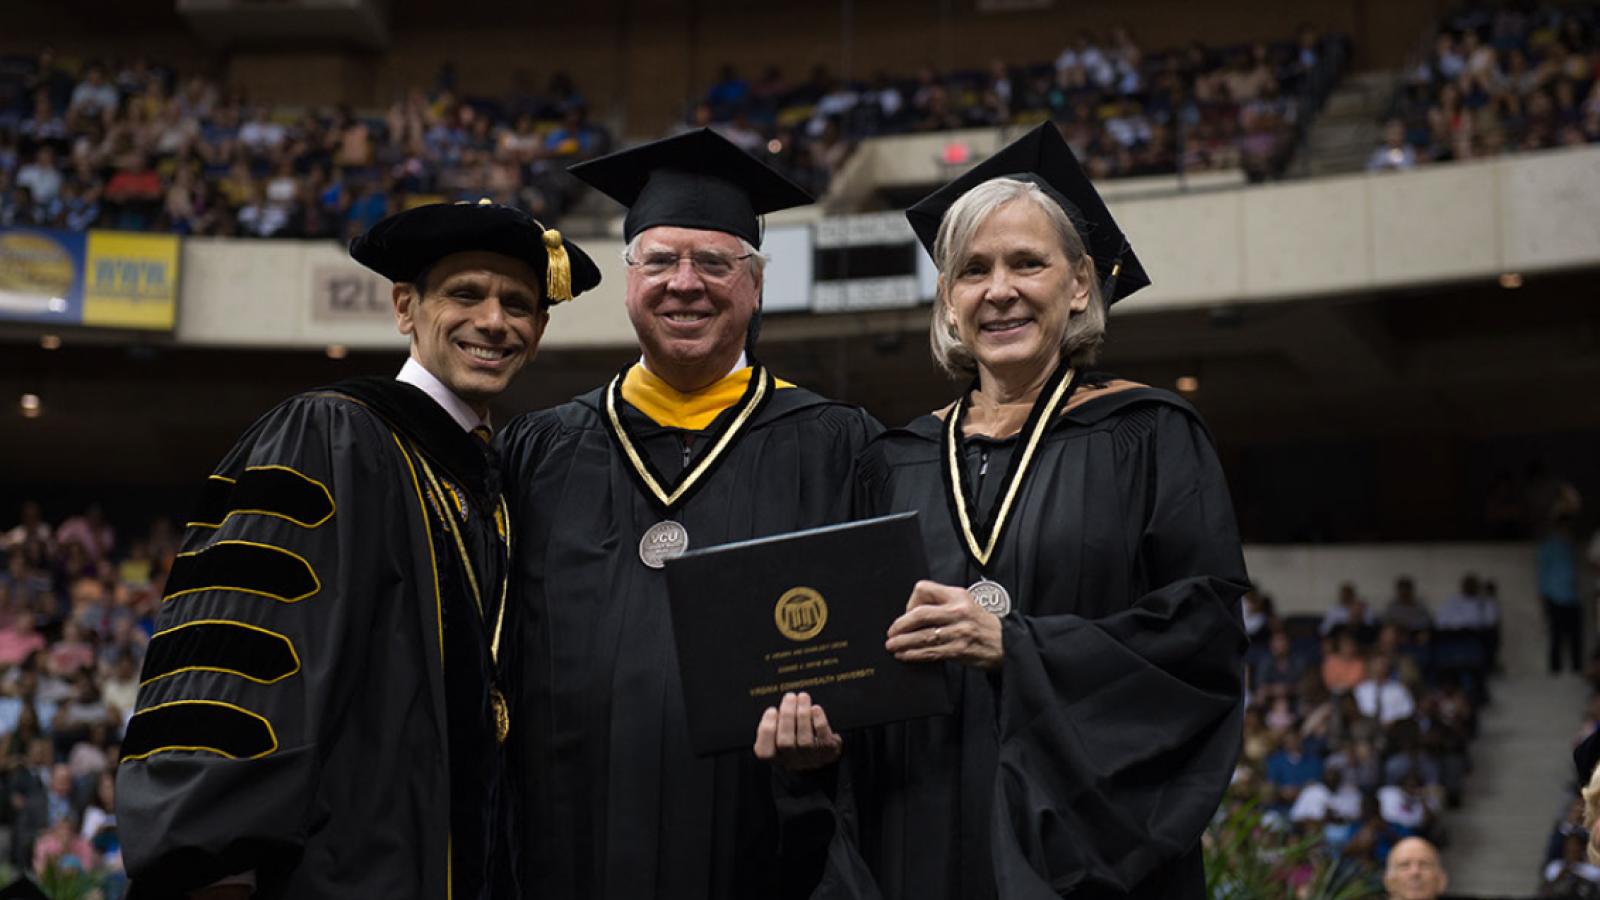 Charles and Ginny Crone (center and right) stand with Michael Rao, Ph.D., president of VCU and VCU Health System, after receiving the Edward A. Wayne Medal at VCU's commencement on May 12.